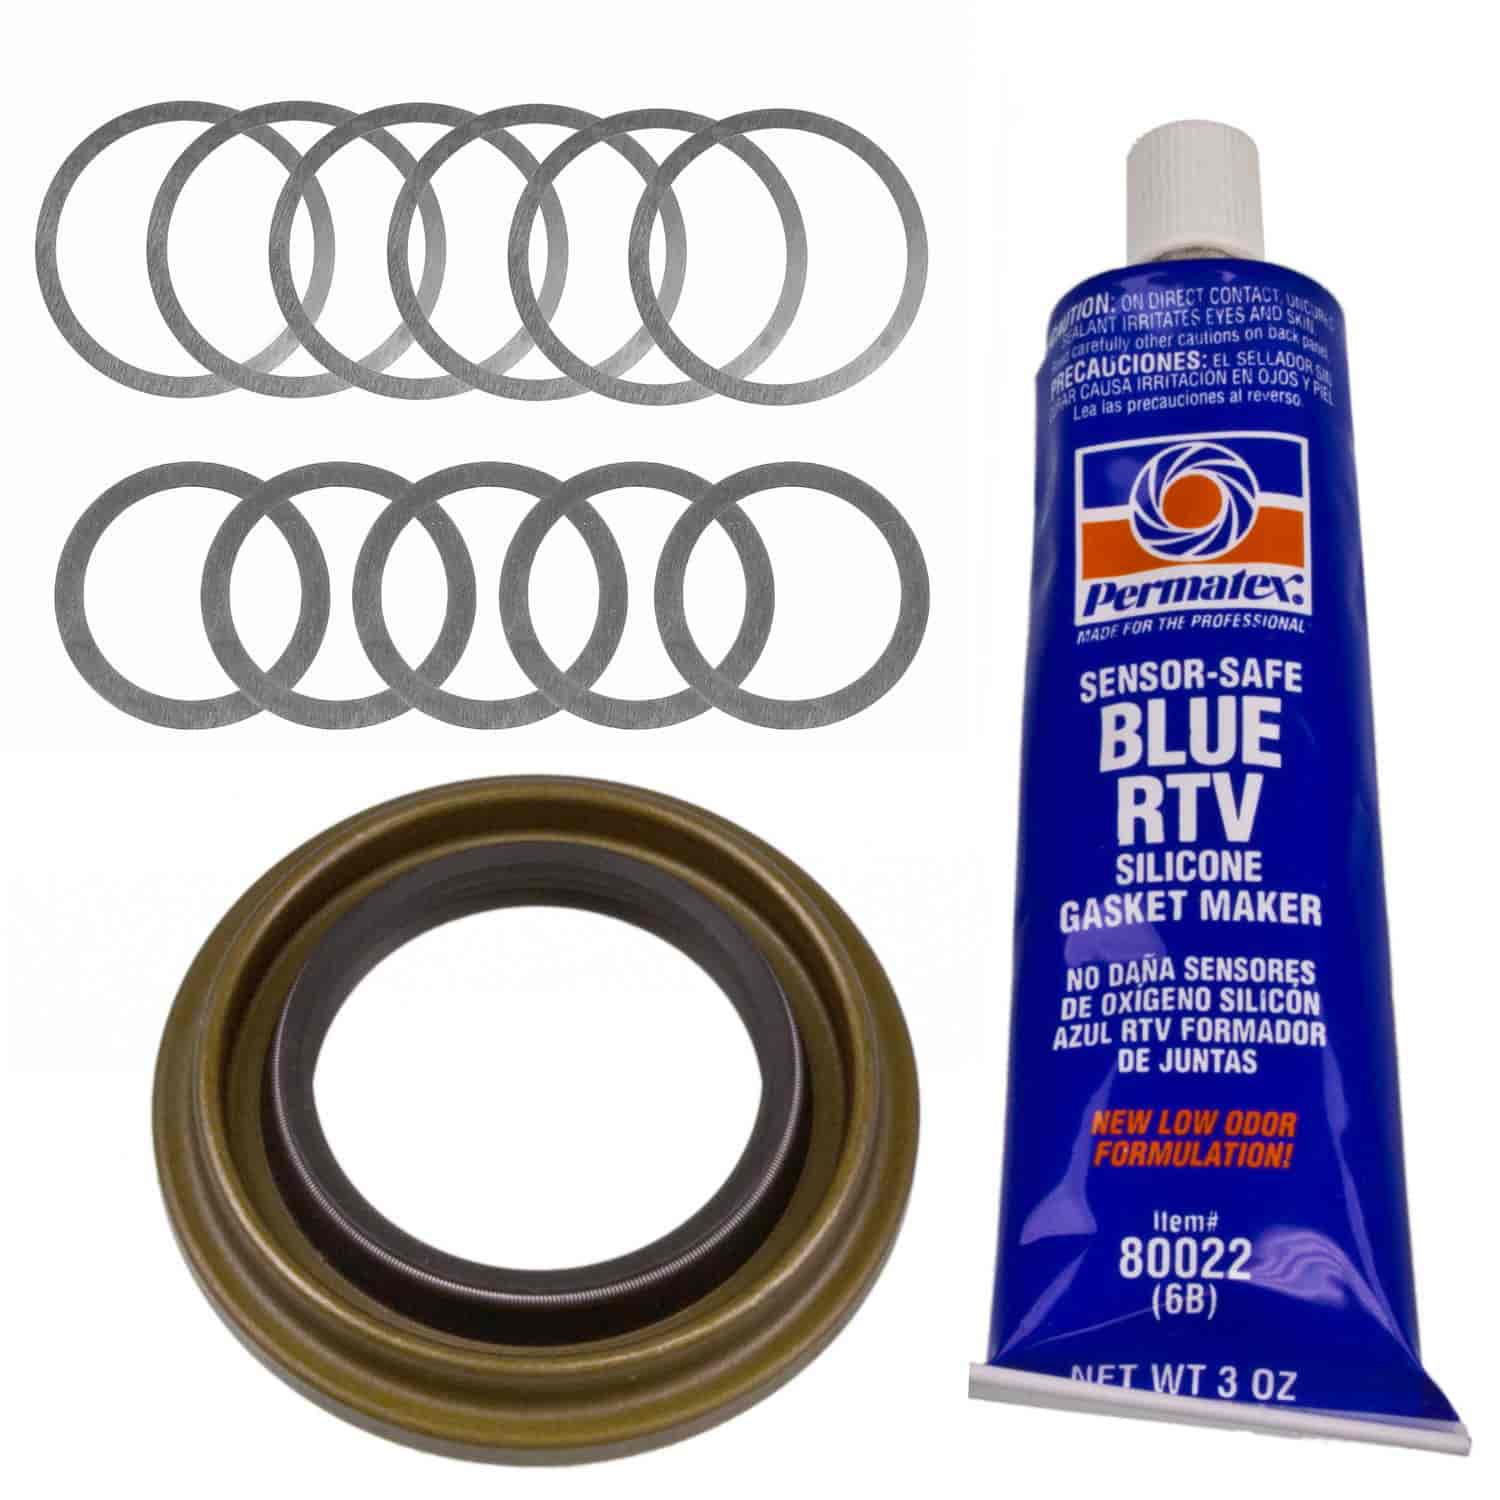 Excel Half Ring And Pinion Install Kit Fits Dana 60 Incl. Cover Gasket/Crush Sleeve/Pinion Shims